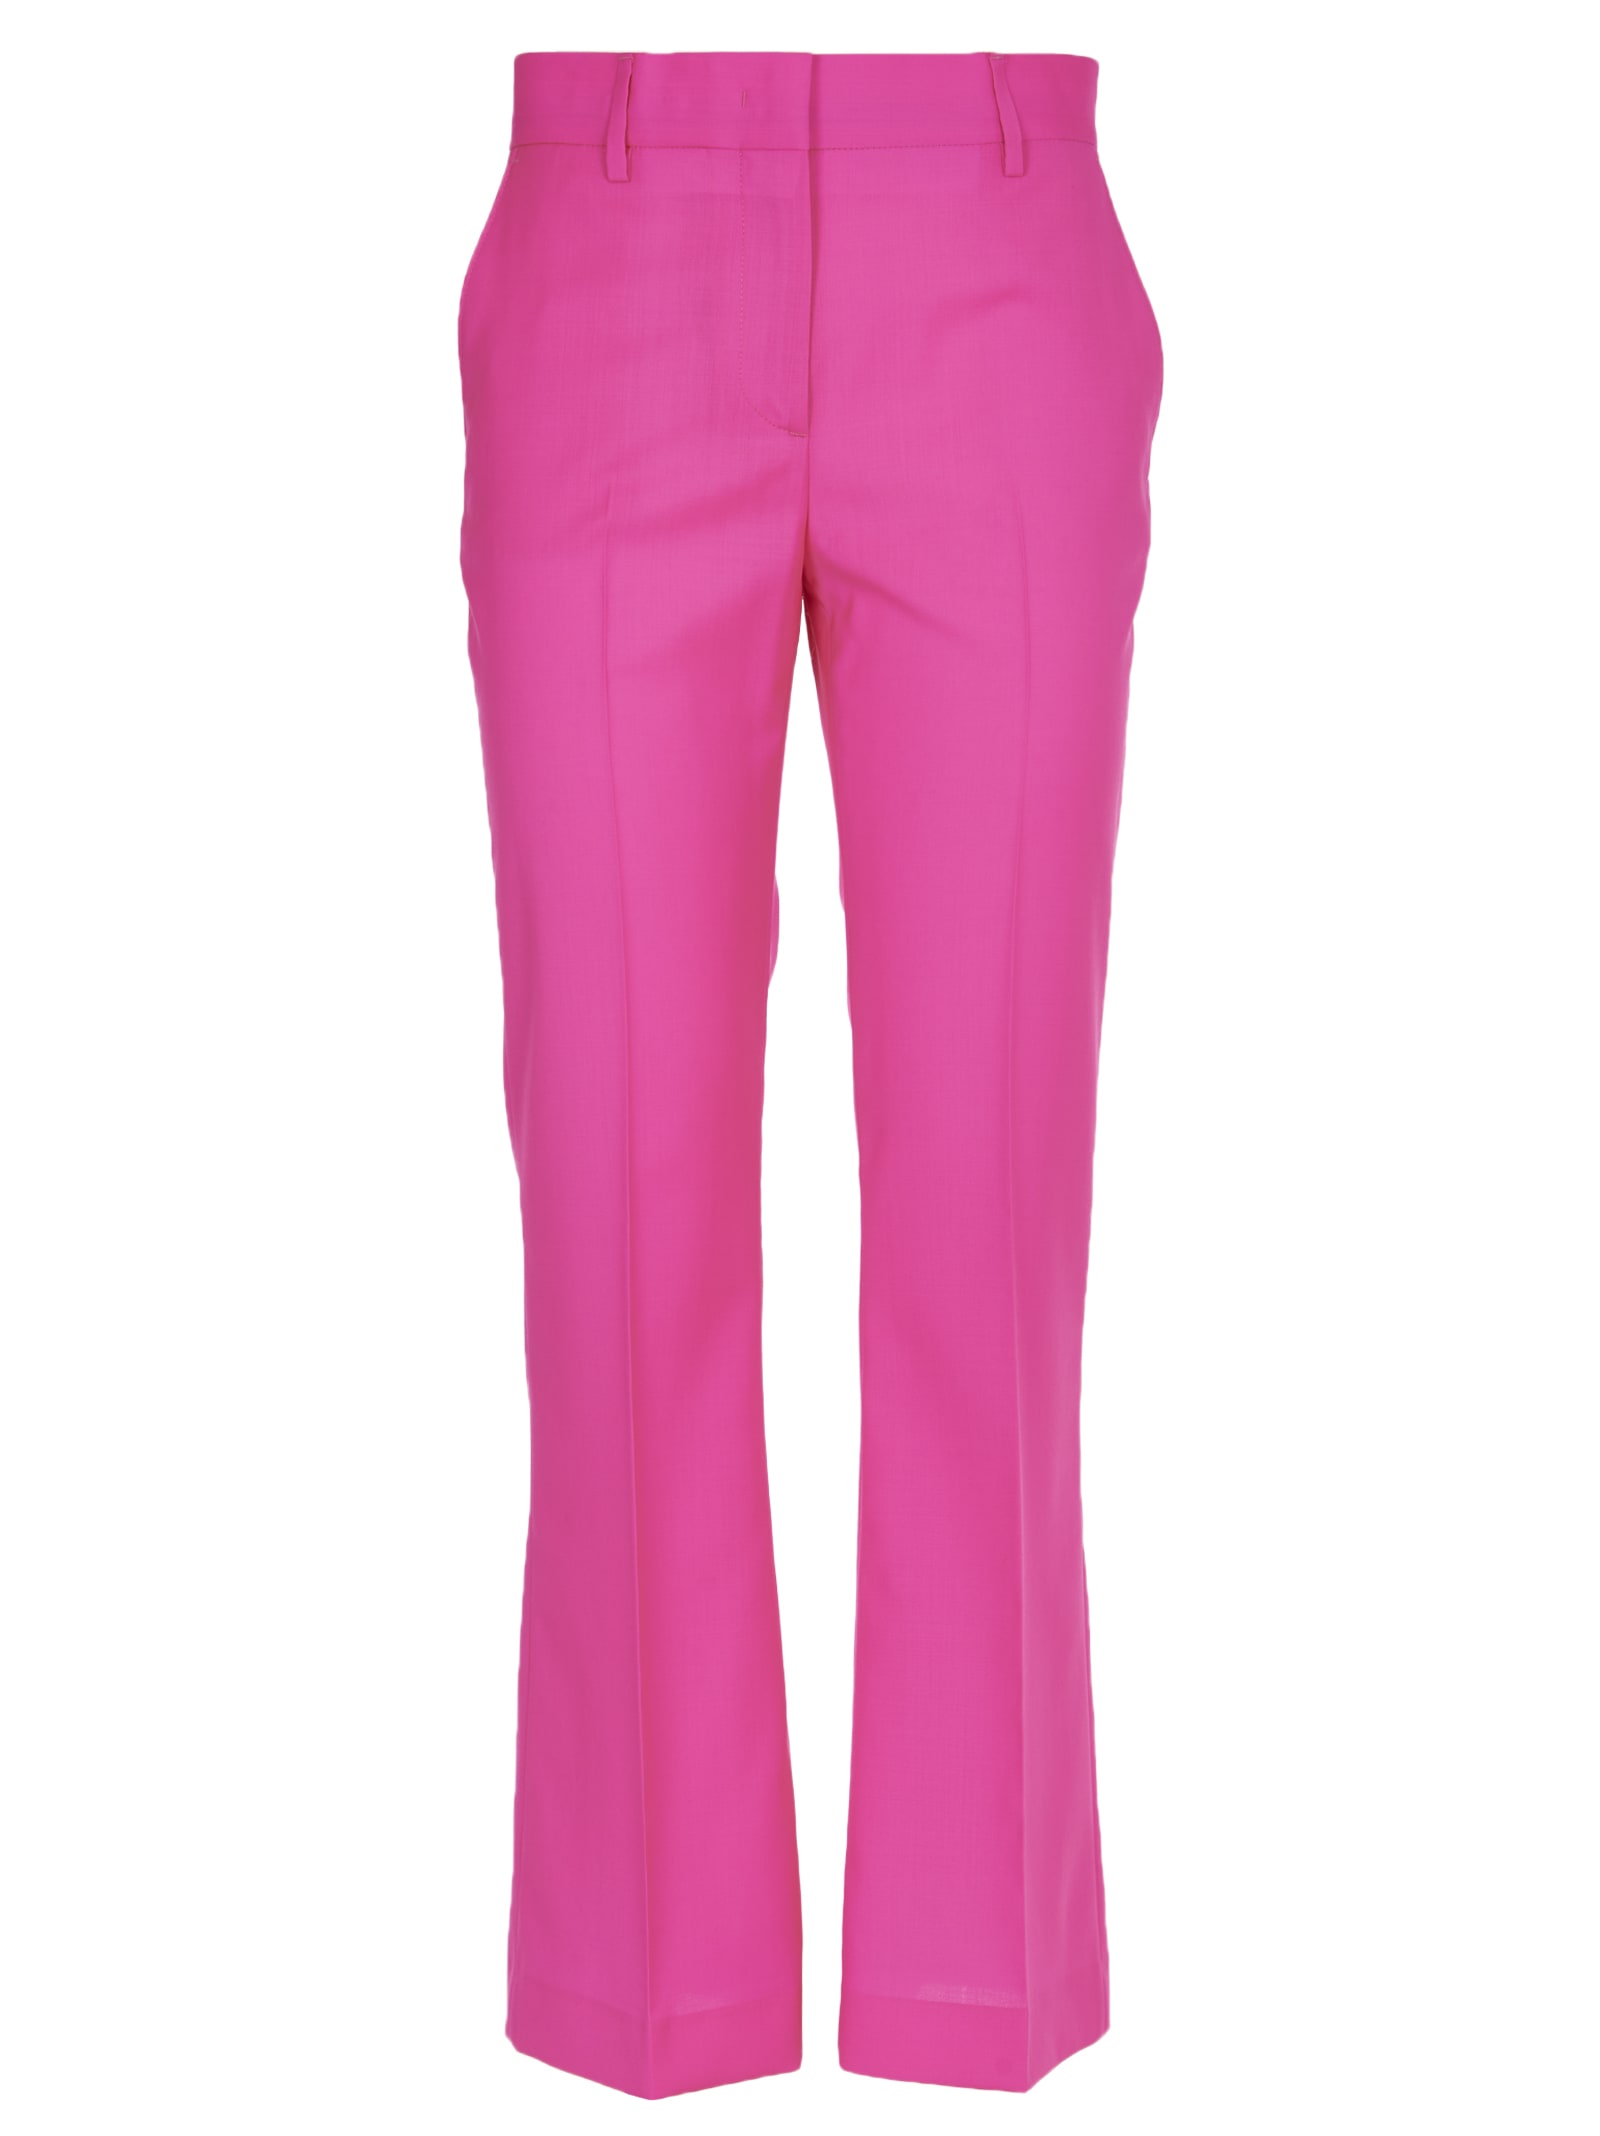 MSGM PINK FLARE TROUSERS,2841MDP93 20711815